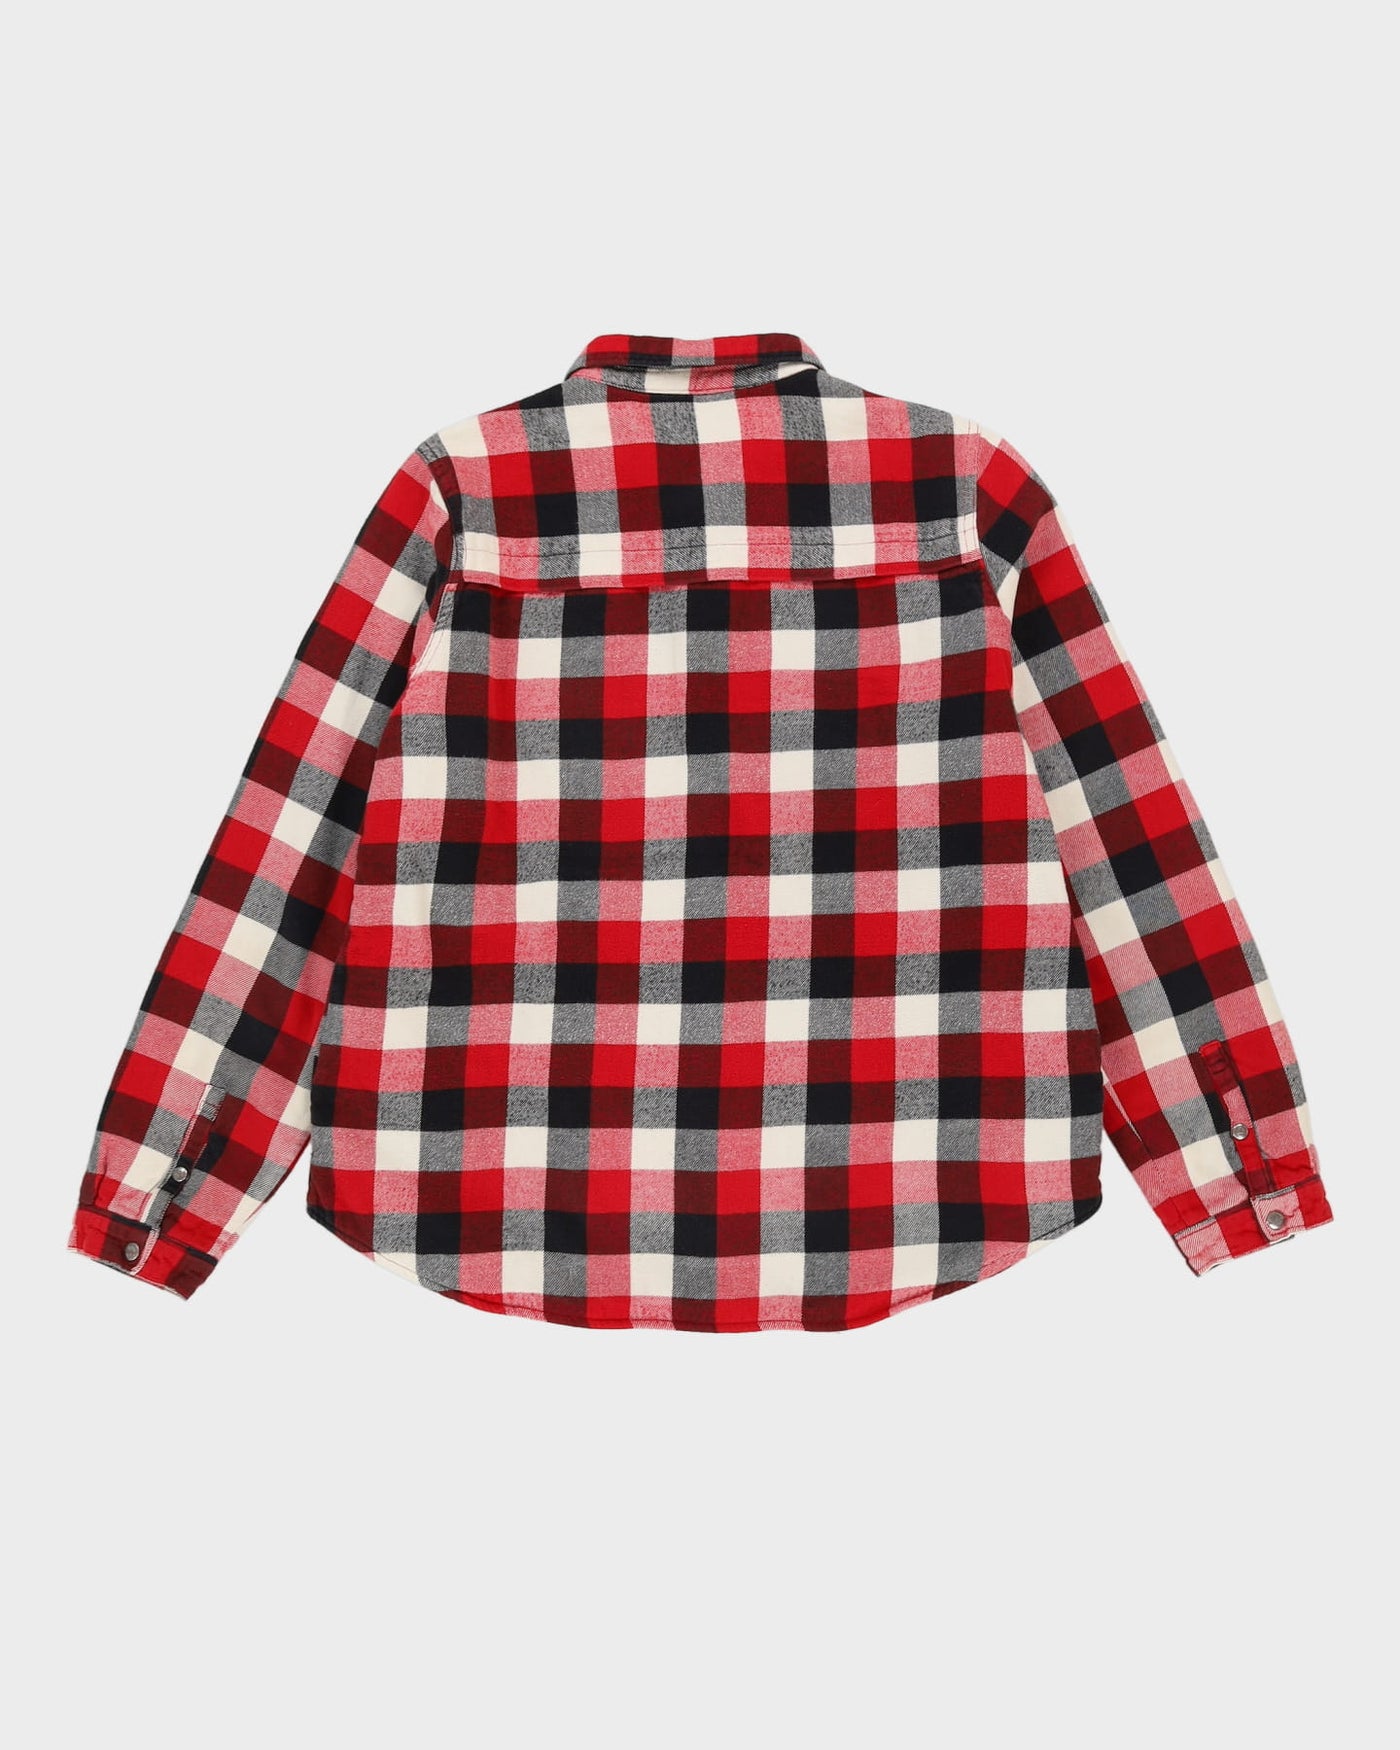 Eddie Bauer Red Check Patterned Padded Flannel Shirt - M